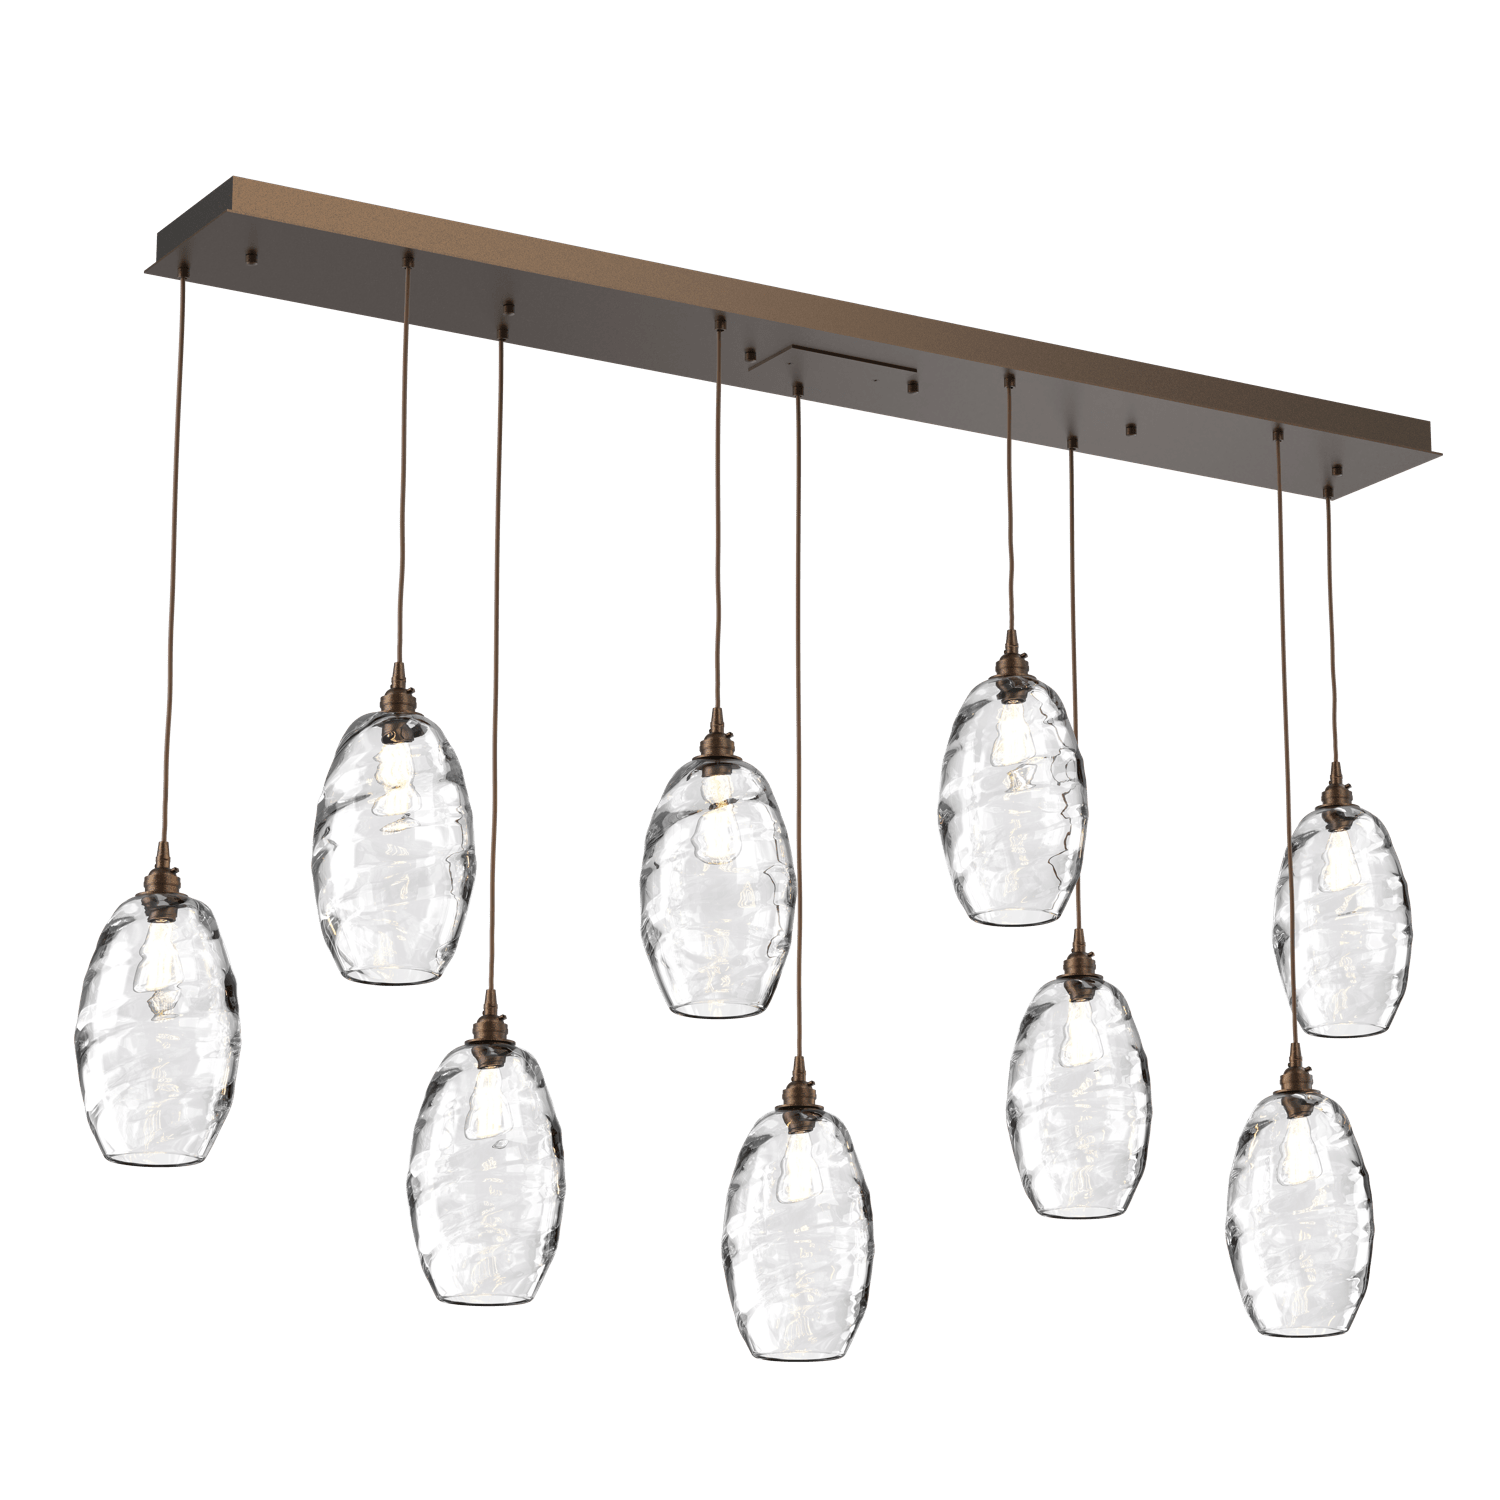 PLB0035-09-FB-OC-Hammerton-Studio-Optic-Blown-Glass-Elisse-9-light-linear-pendant-chandelier-with-flat-bronze-finish-and-optic-clear-blown-glass-shades-and-incandescent-lamping